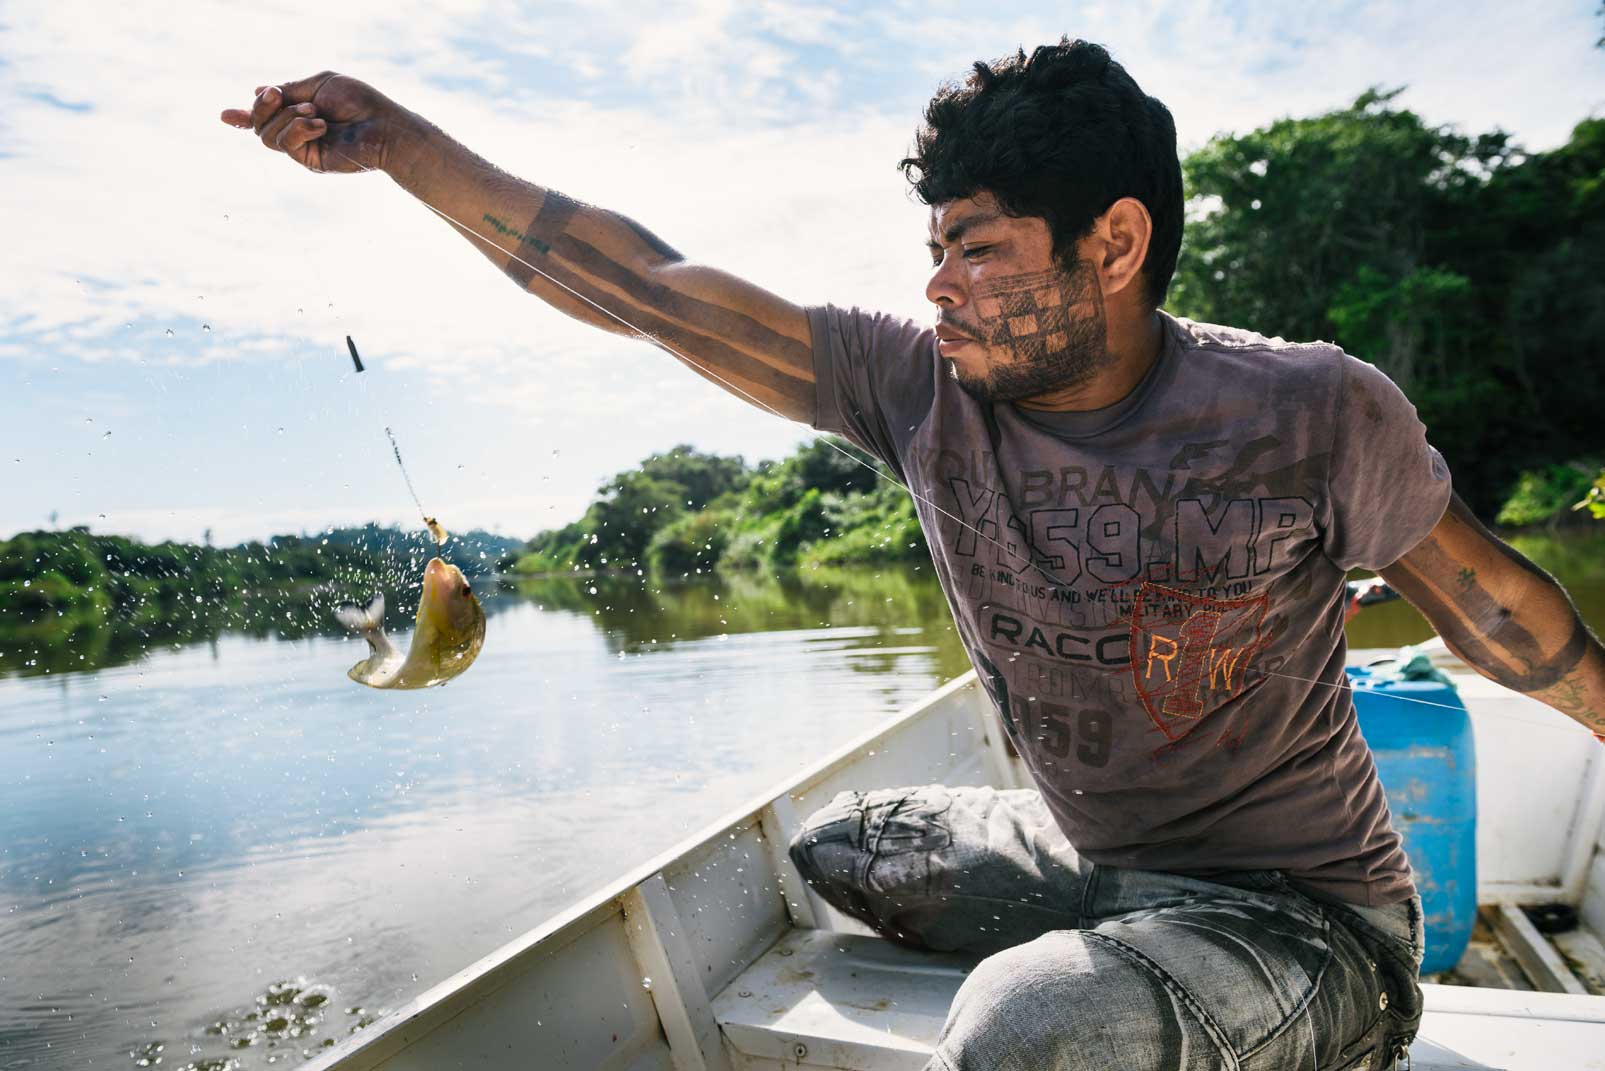 A Xikrin community member catches fish in the Rio Bacaja. The Xikrin land is one of 32 areas selected by the Brazilian government for an environment management pilot project in indigenous lands. Photo © Kevin Arnold